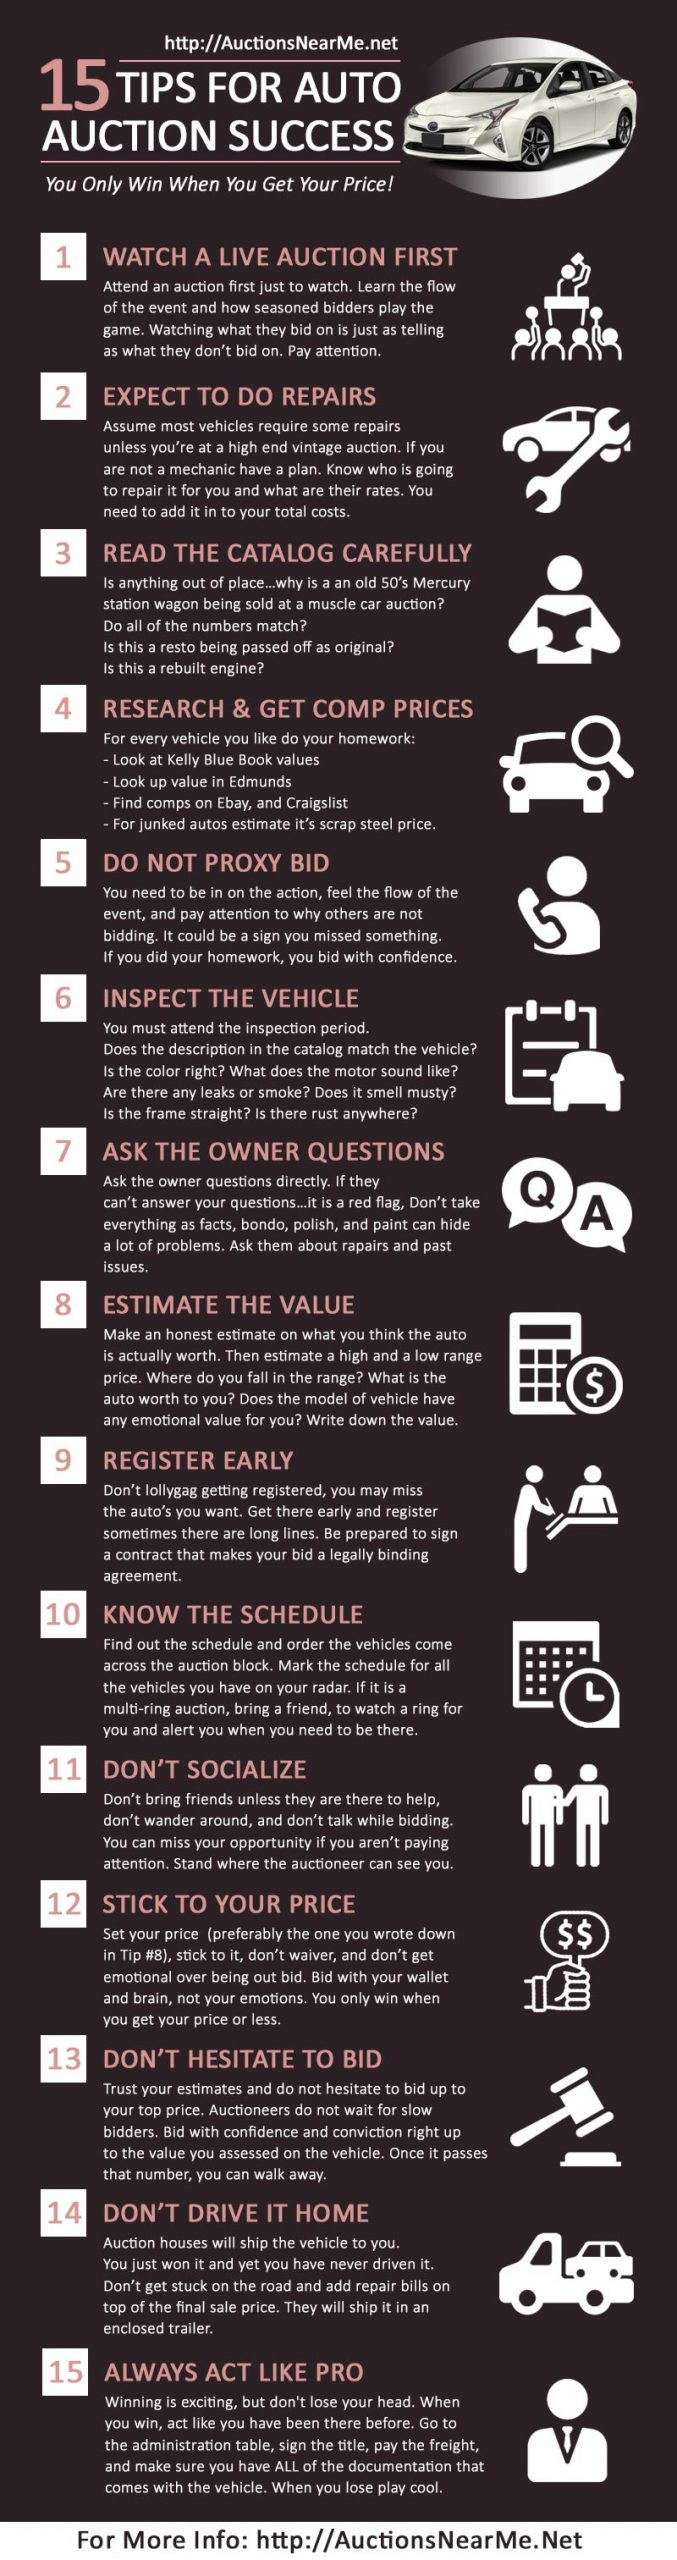 15 Auto Auctions Tips for Success